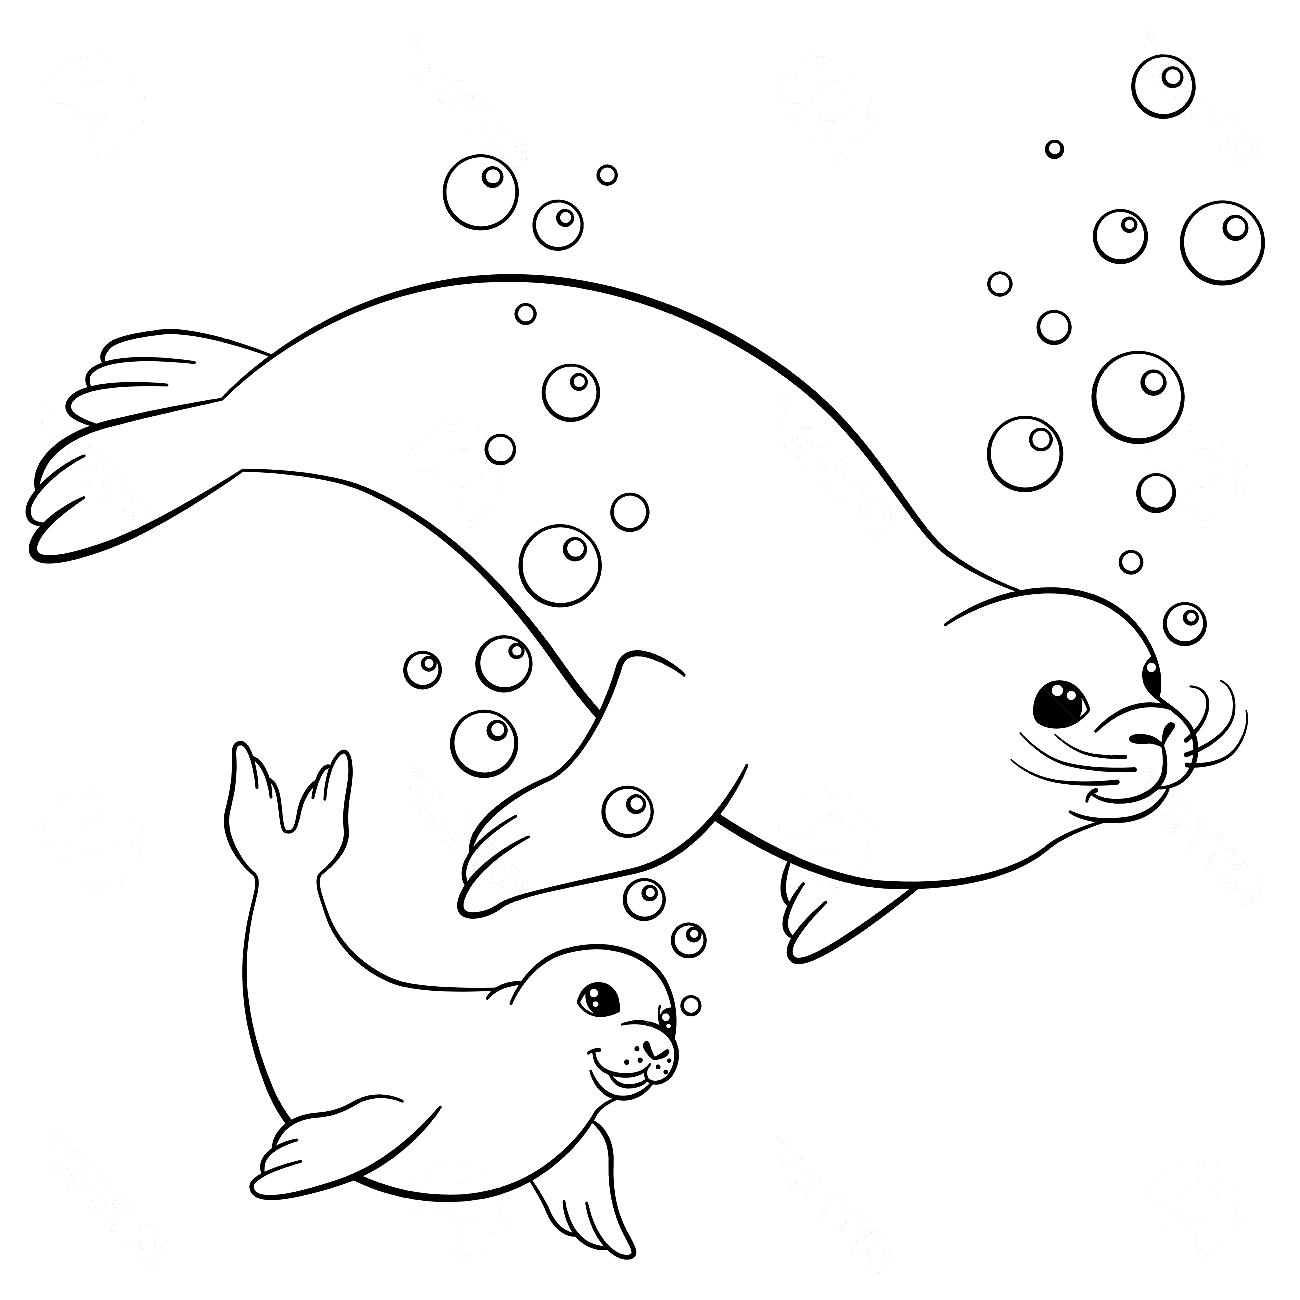 Drawing 6 from Seals coloring page to print and coloring